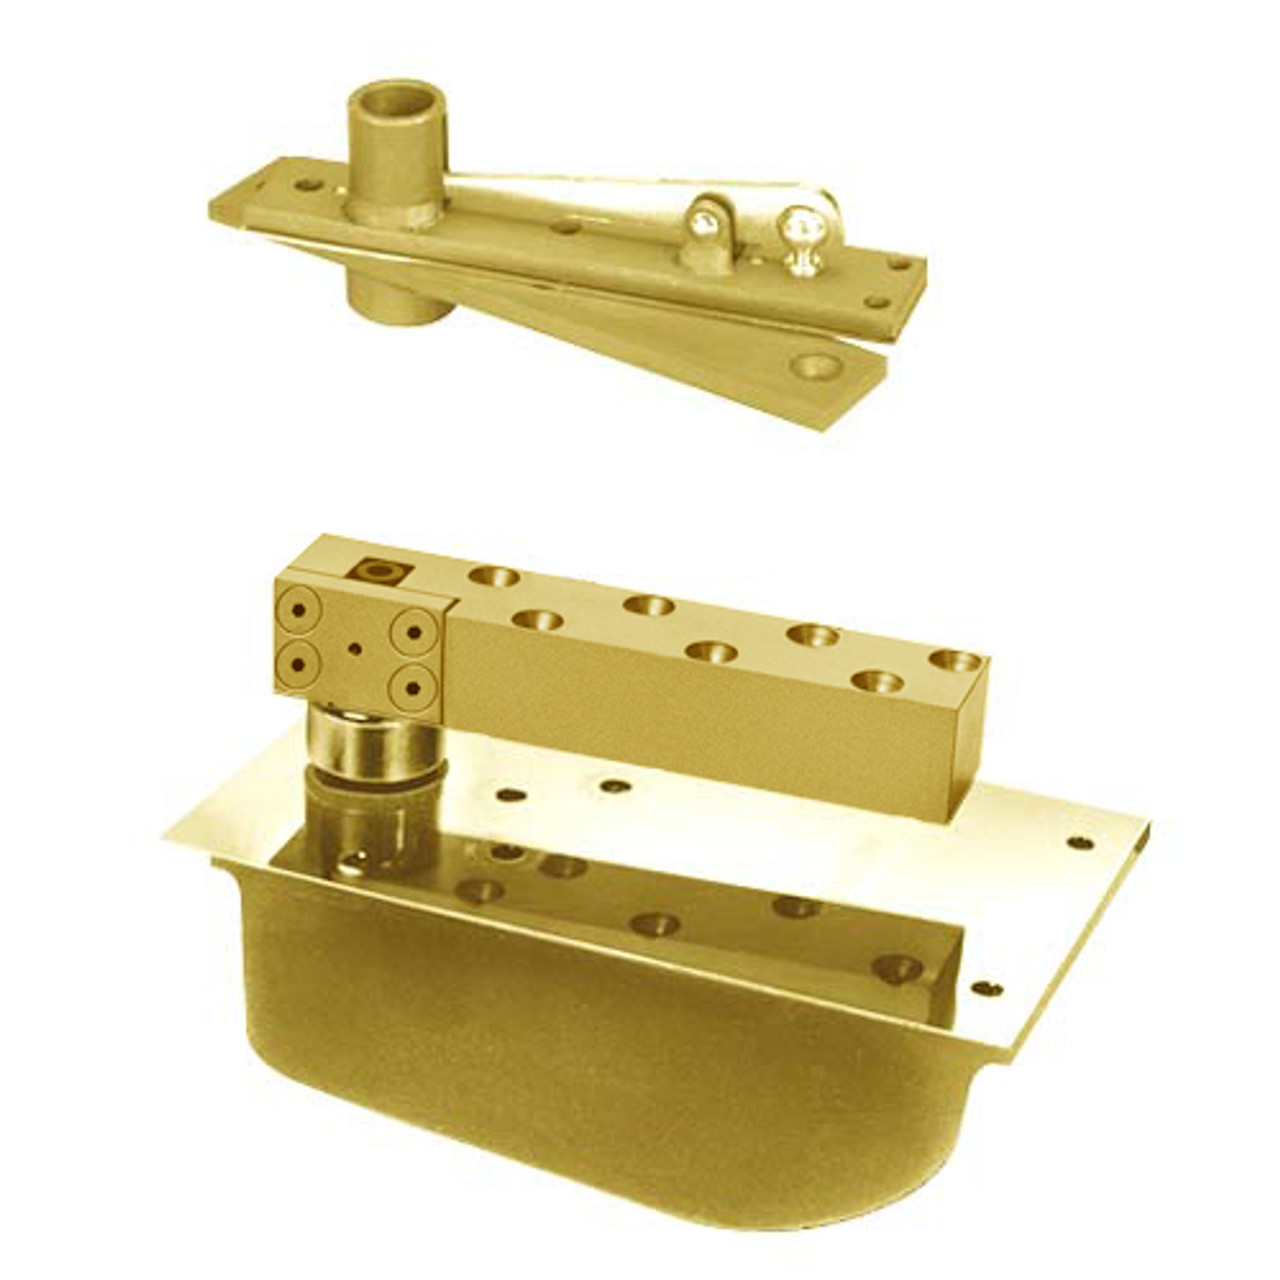 H28-90N-587-LFP-LH-605 Rixson 28 Series Extra Heavy Duty Single Acting Center Hung Concealed Floor Closer in Bright Brass Finish